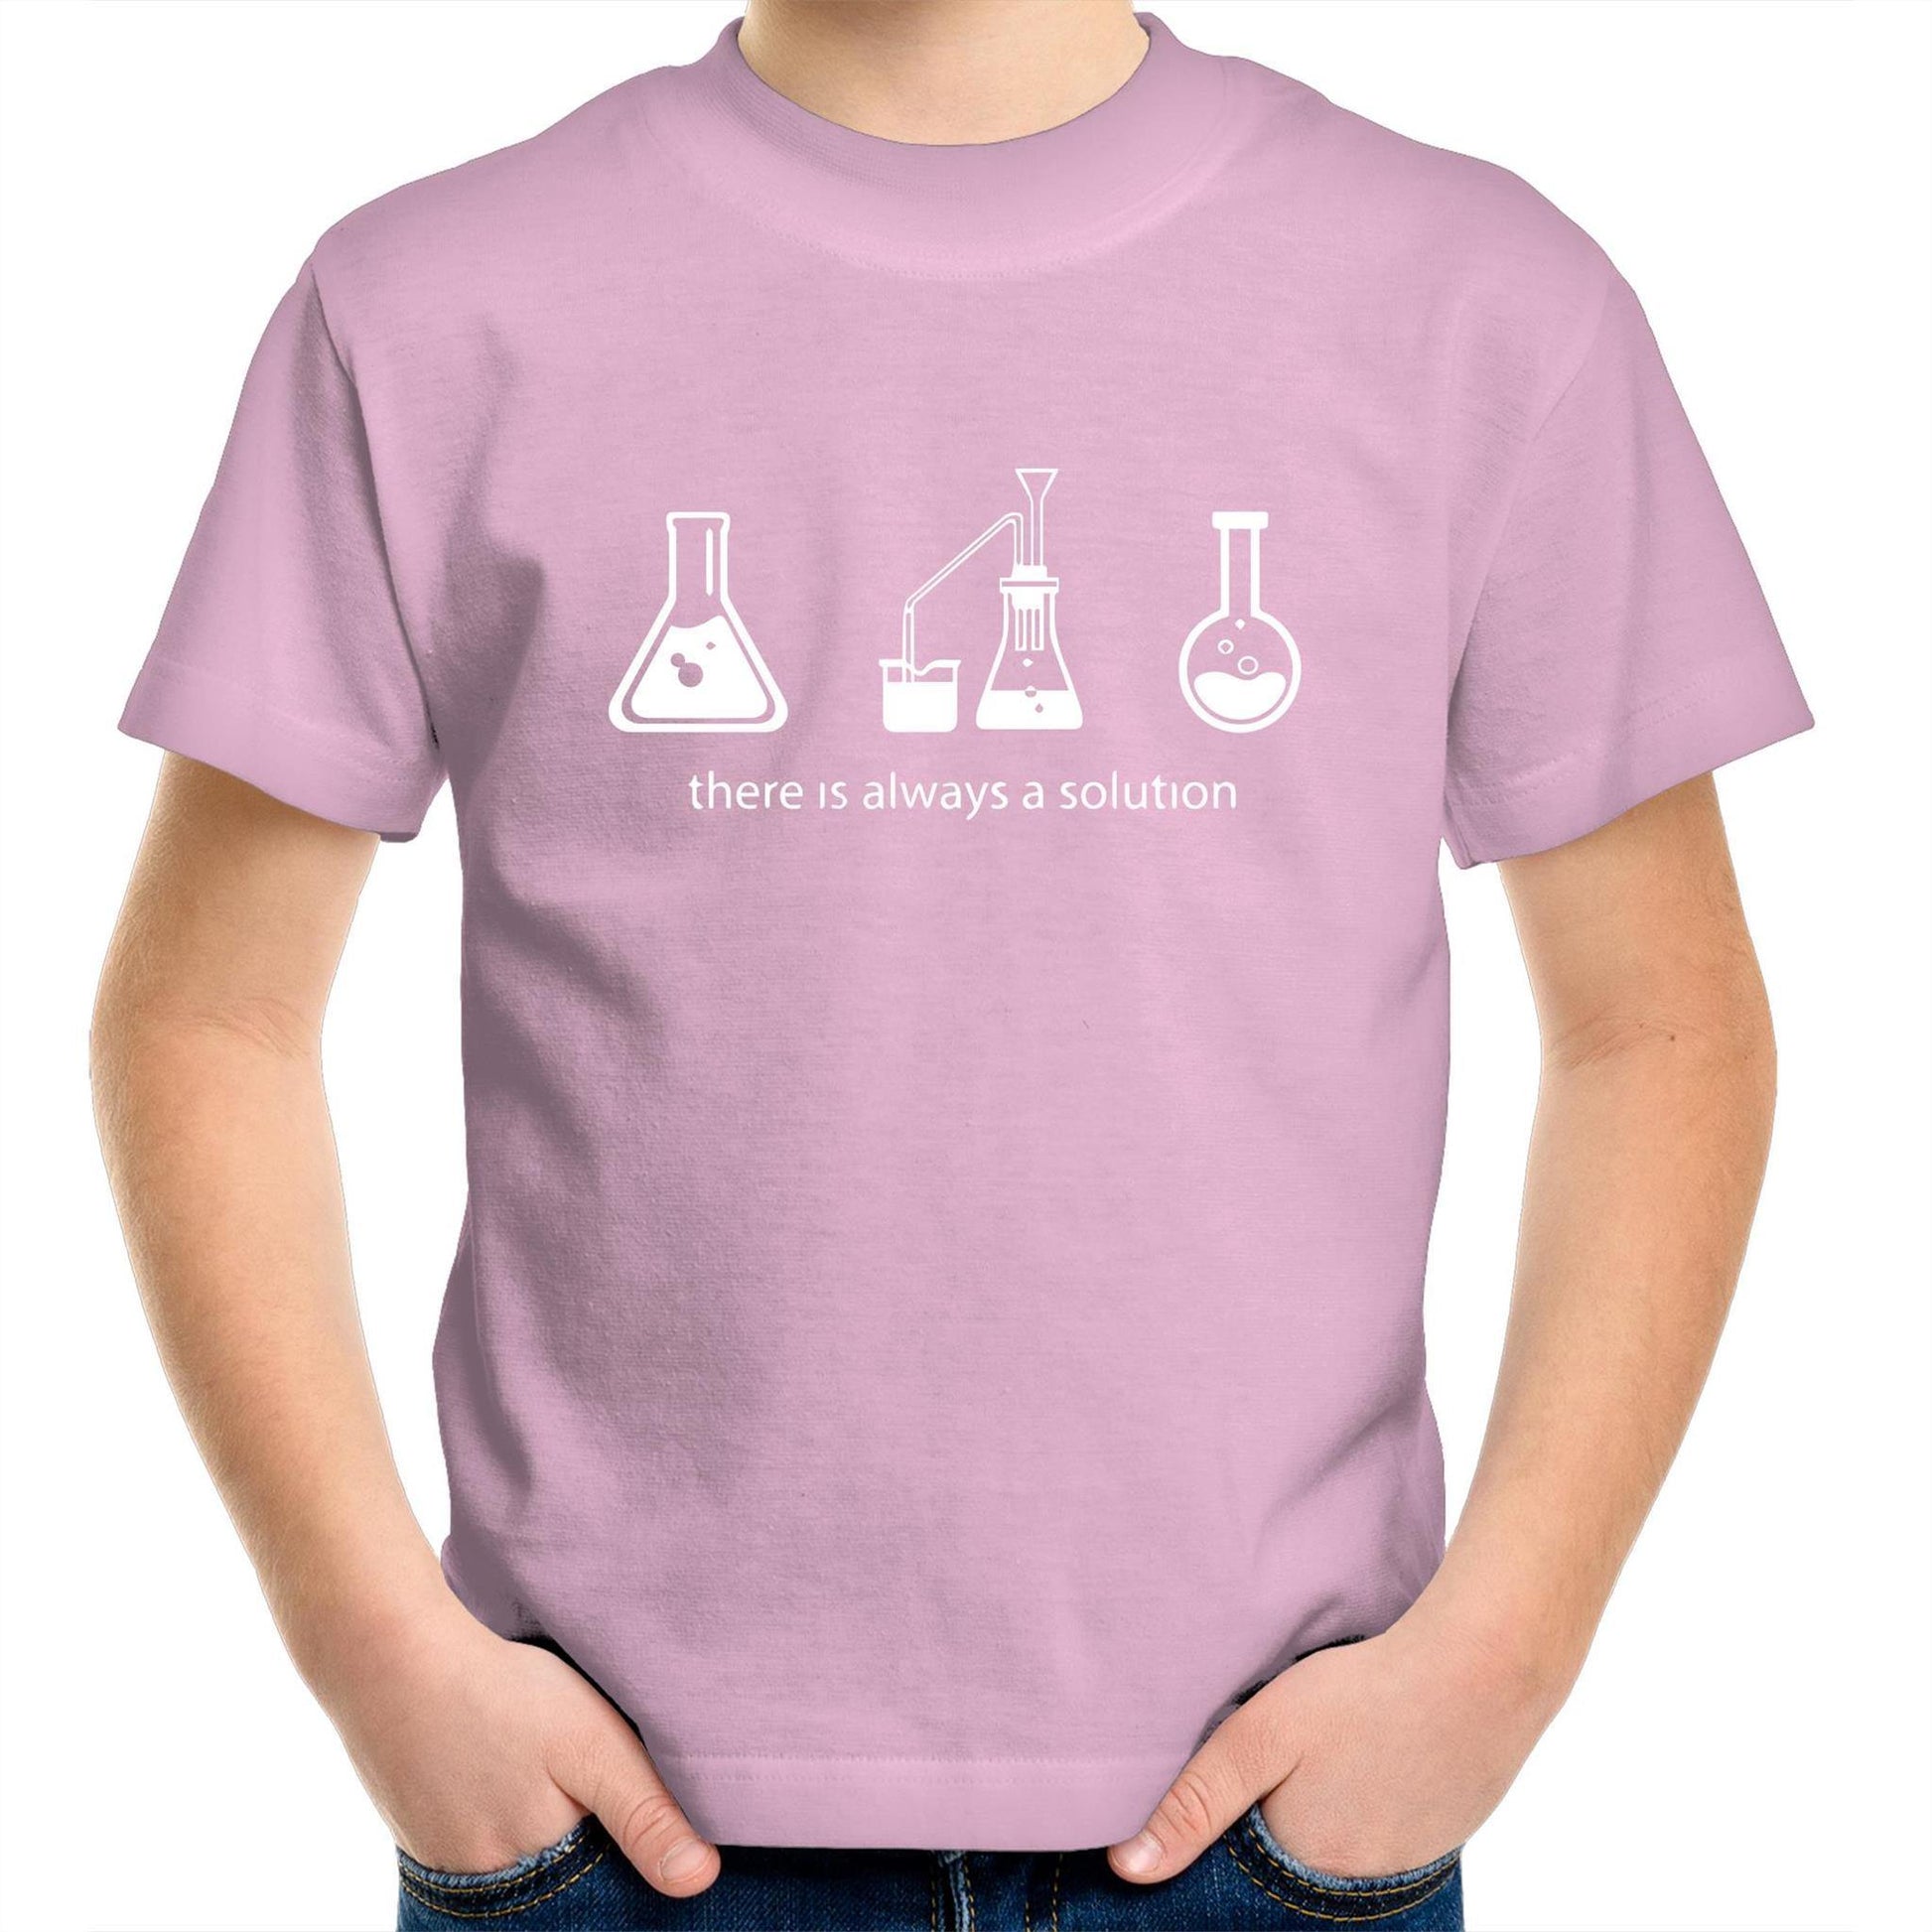 There Is Always A Solution - Kids Youth Crew T-Shirt Pink Kids Youth T-shirt Science